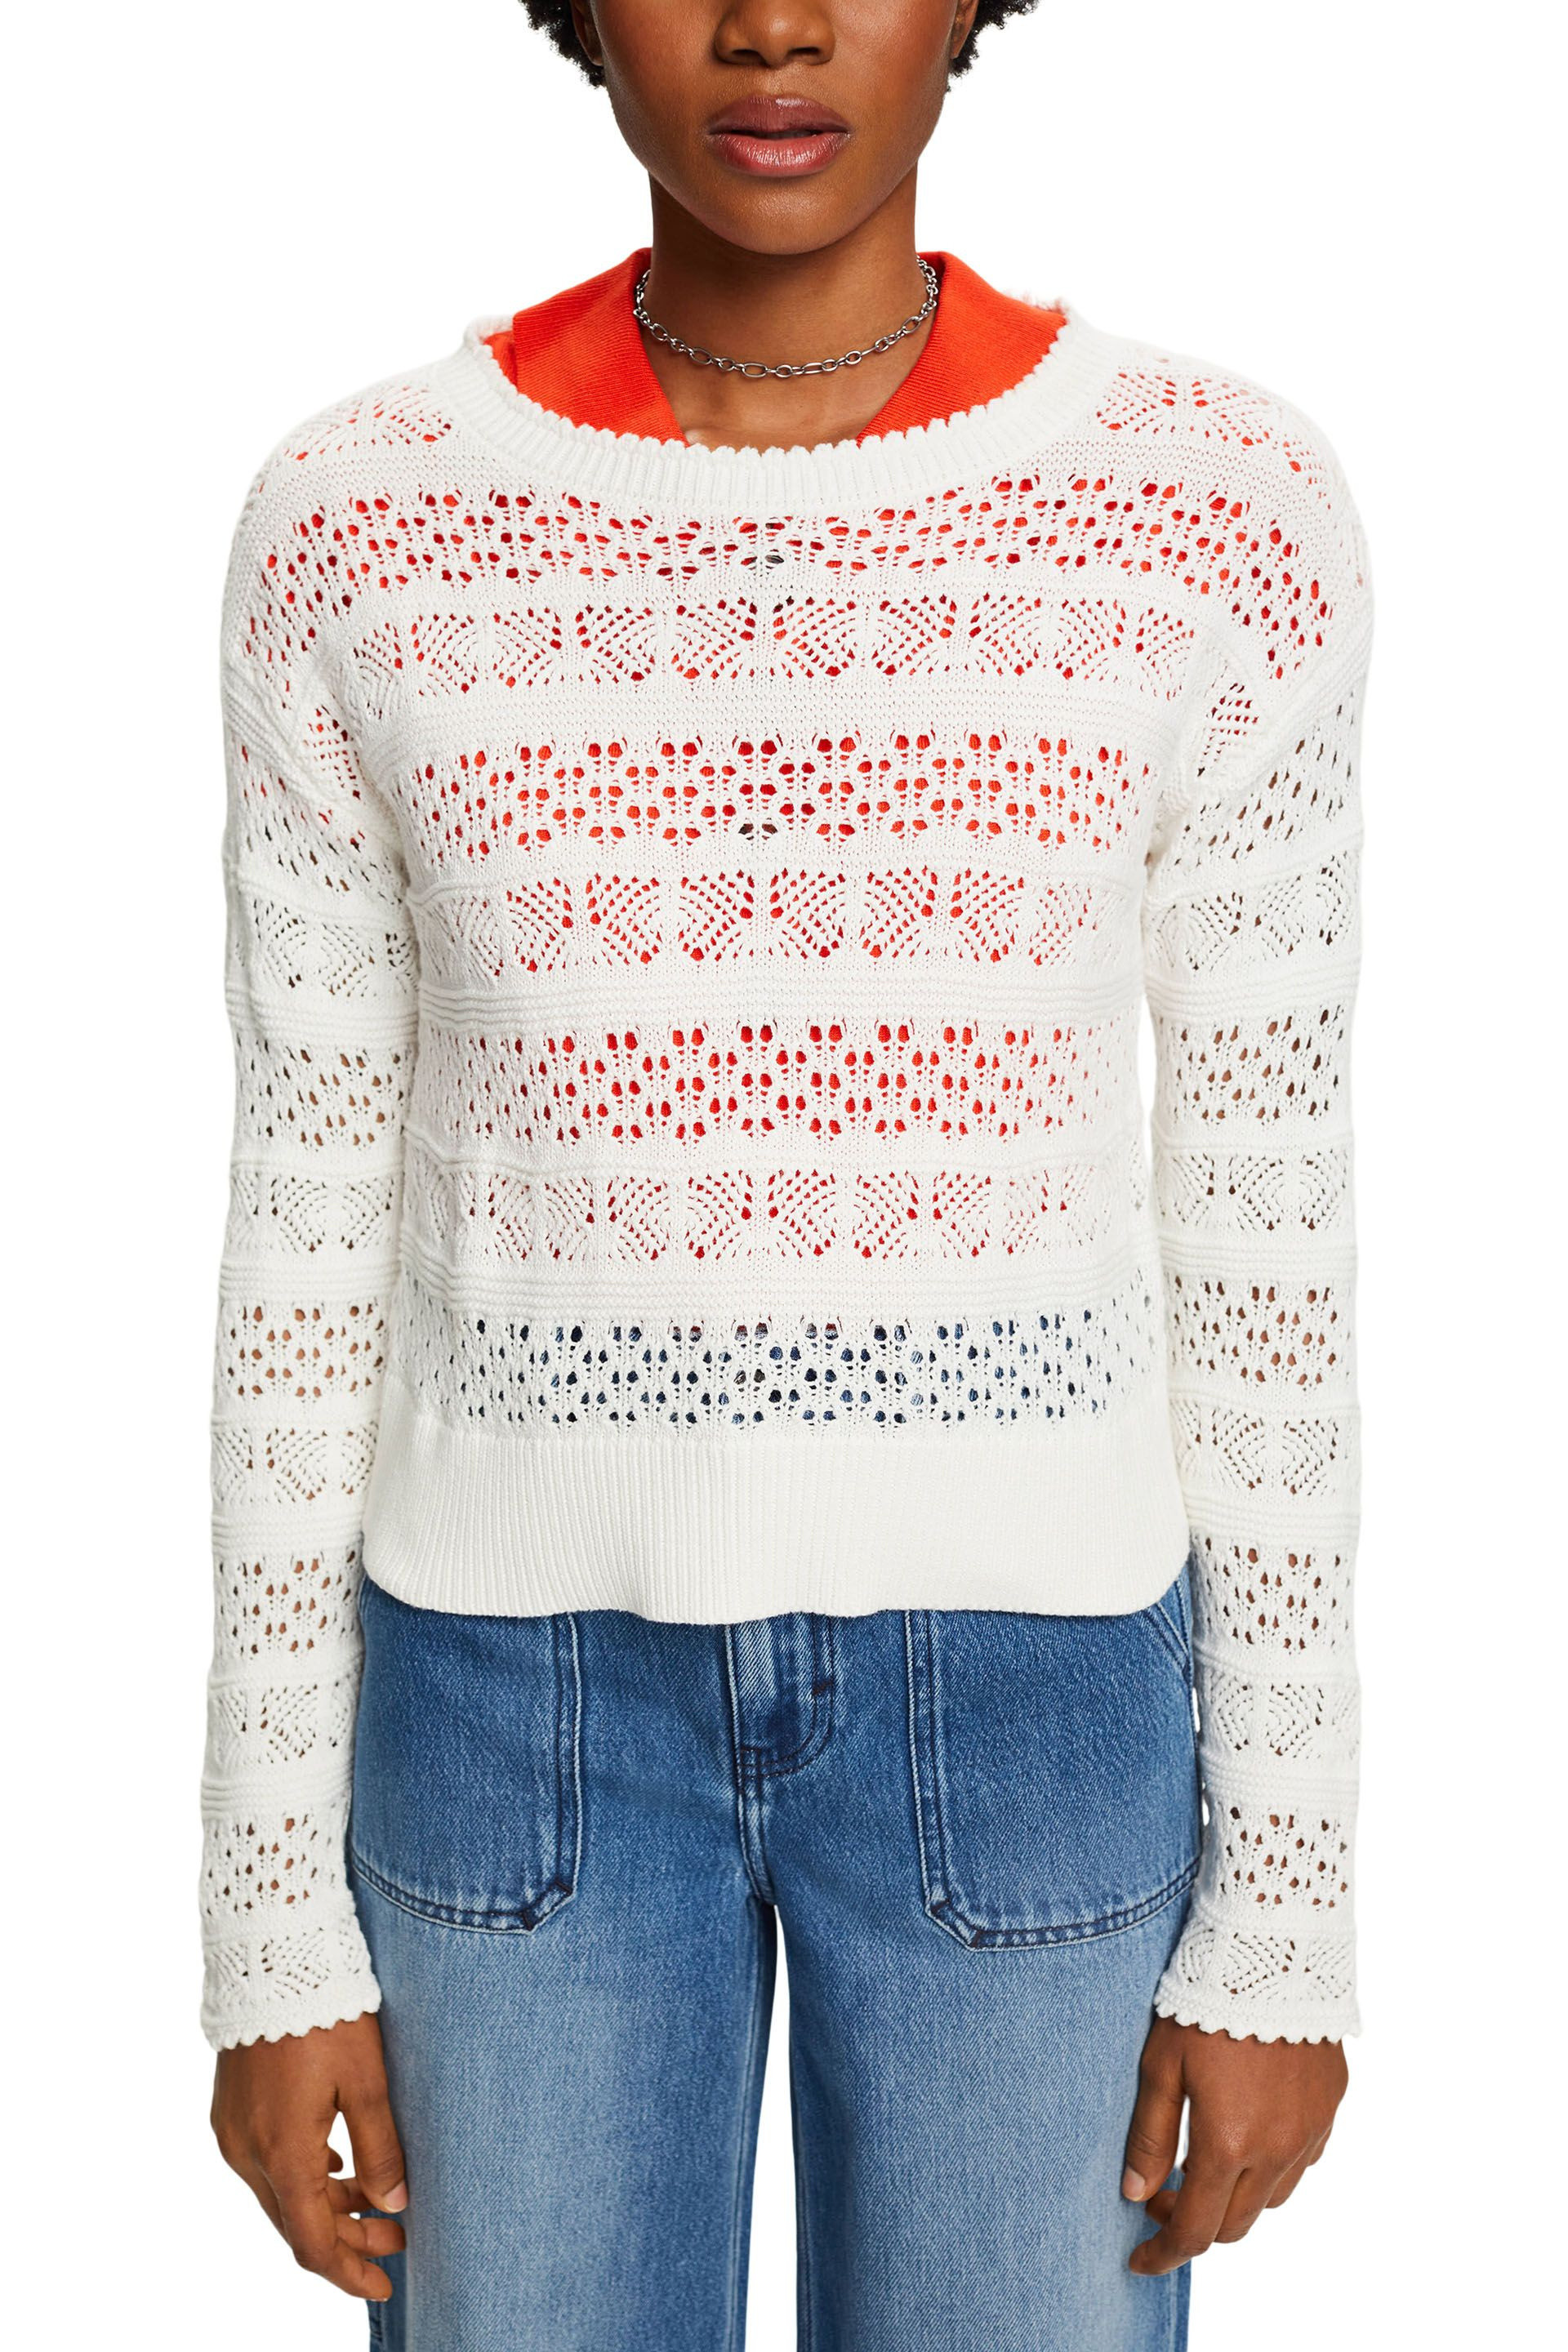 Esprit - Knitted pullover in cotton, White, large image number 2